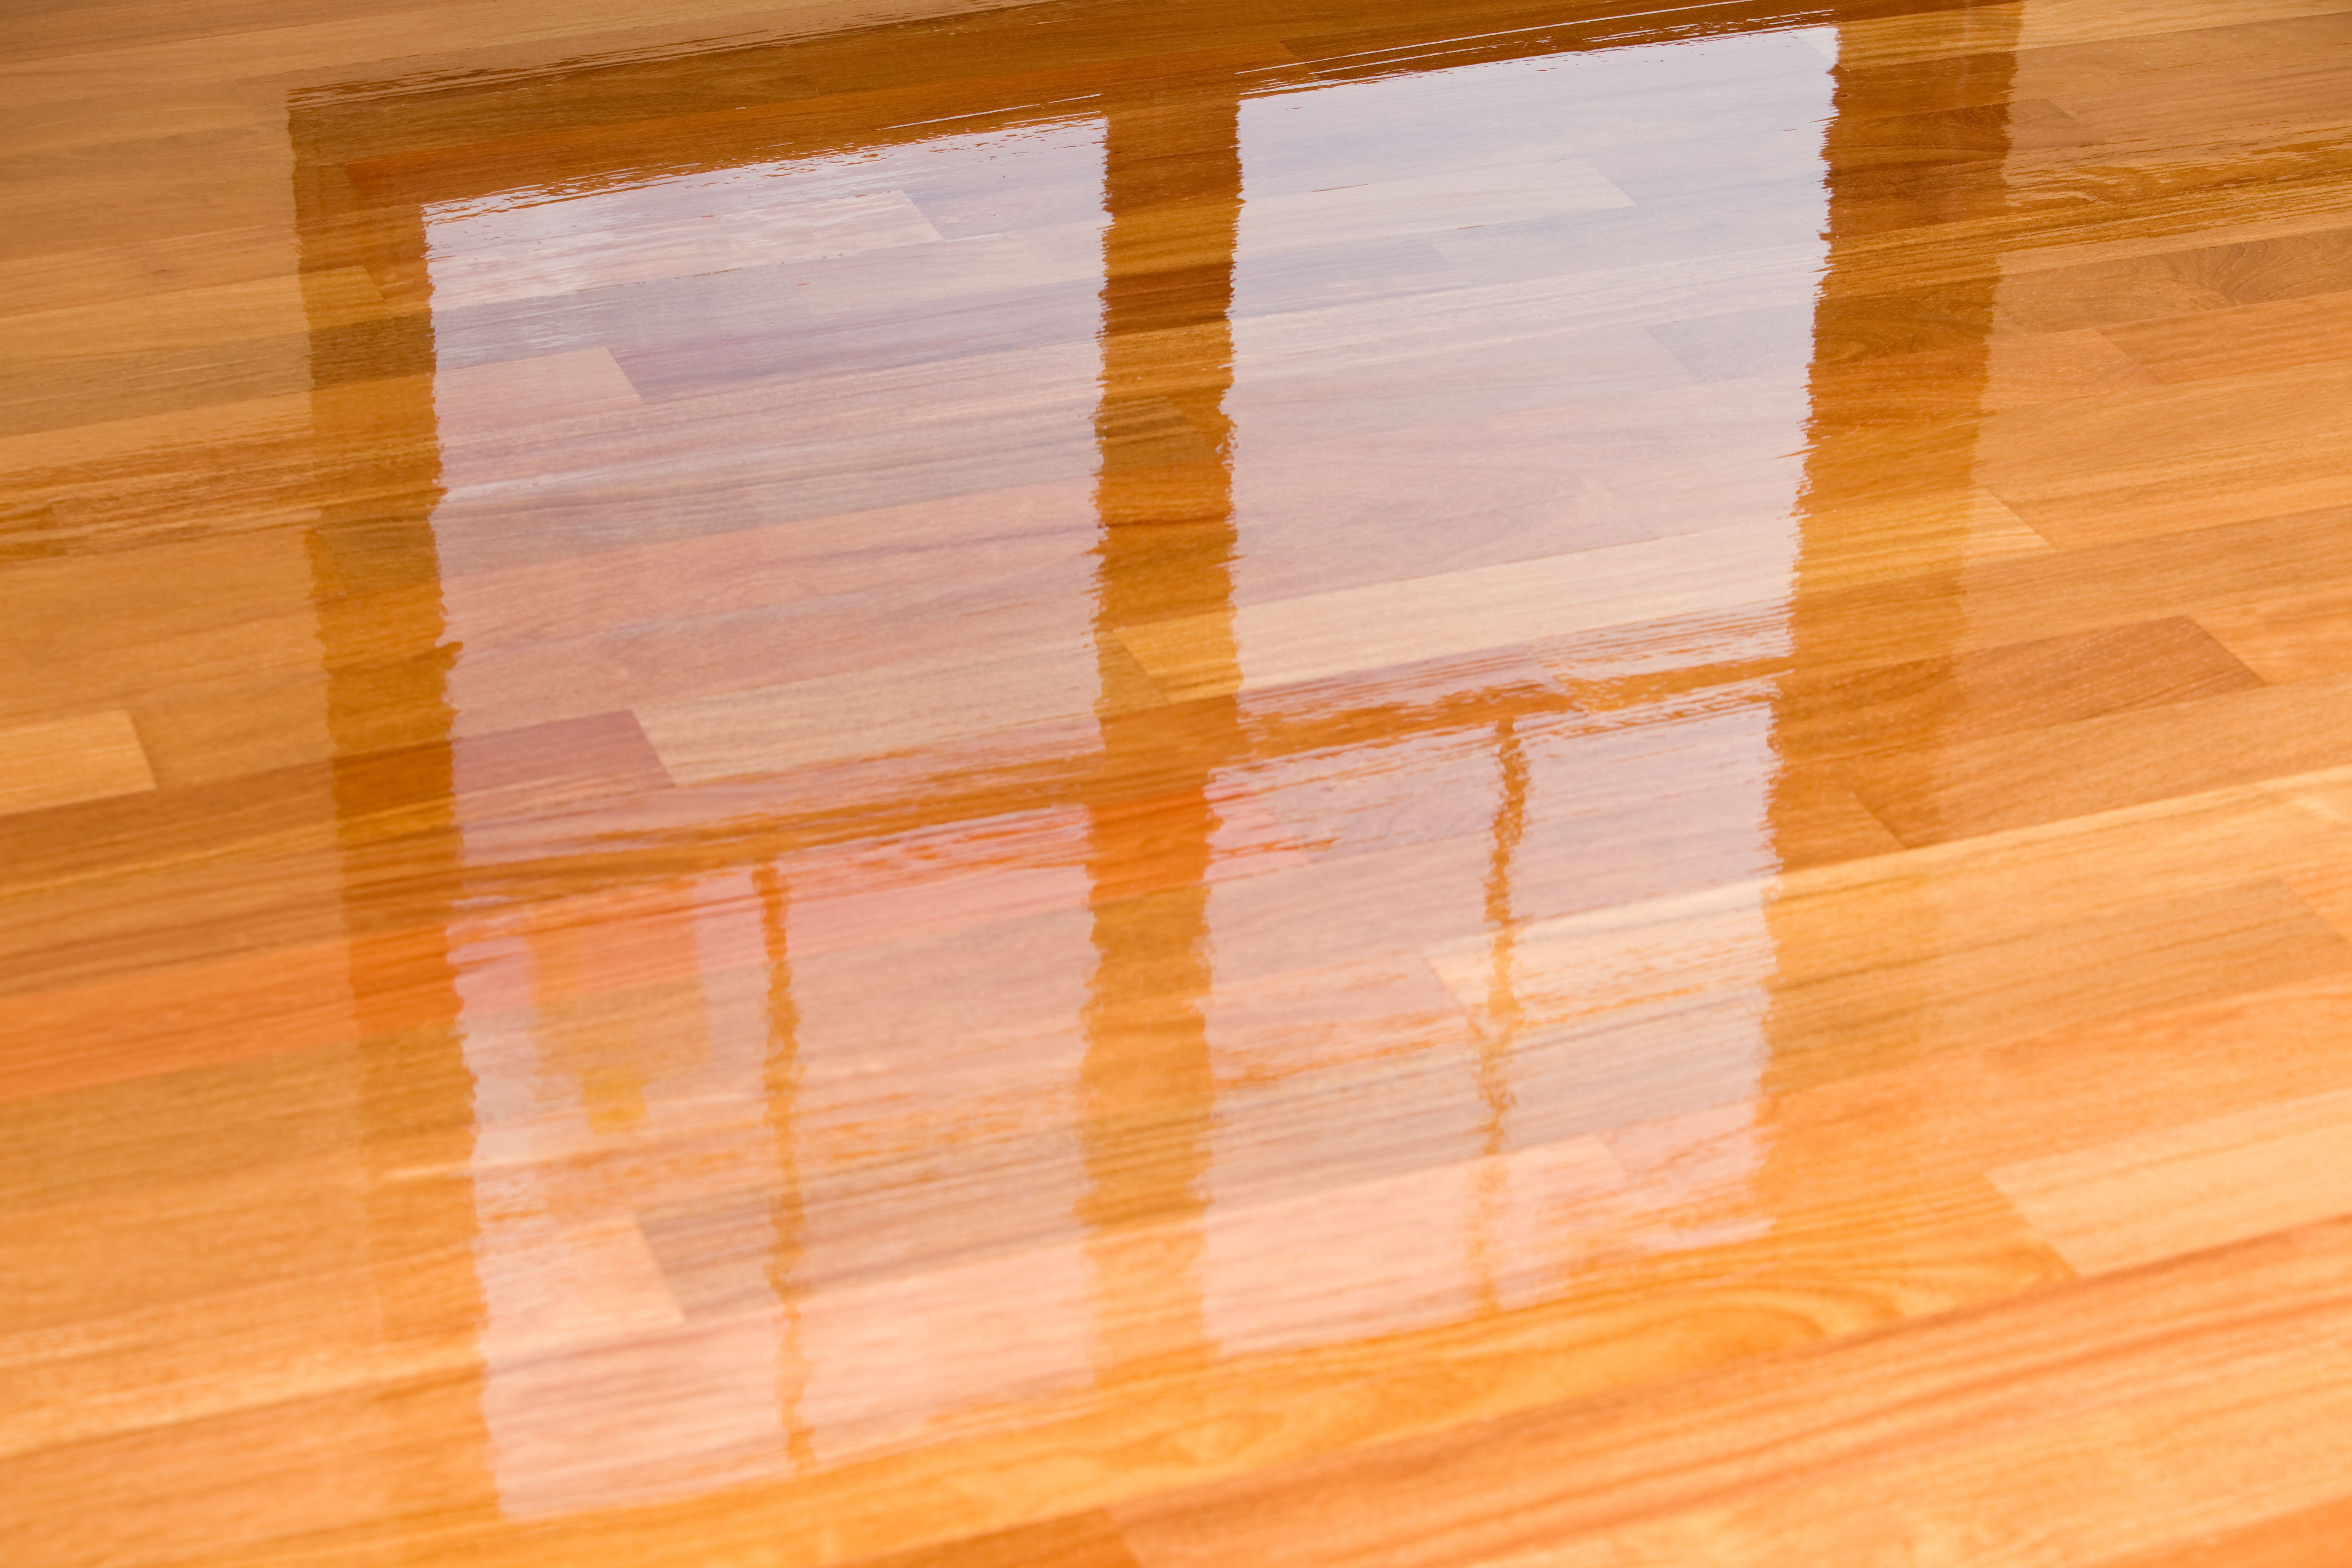 hardwood floor repair gaps in the planks of guide to laminate flooring water and damage repair with regard to wet polyurethane on new hardwood floor with window reflection 183846705 582e34da3df78c6f6a403968